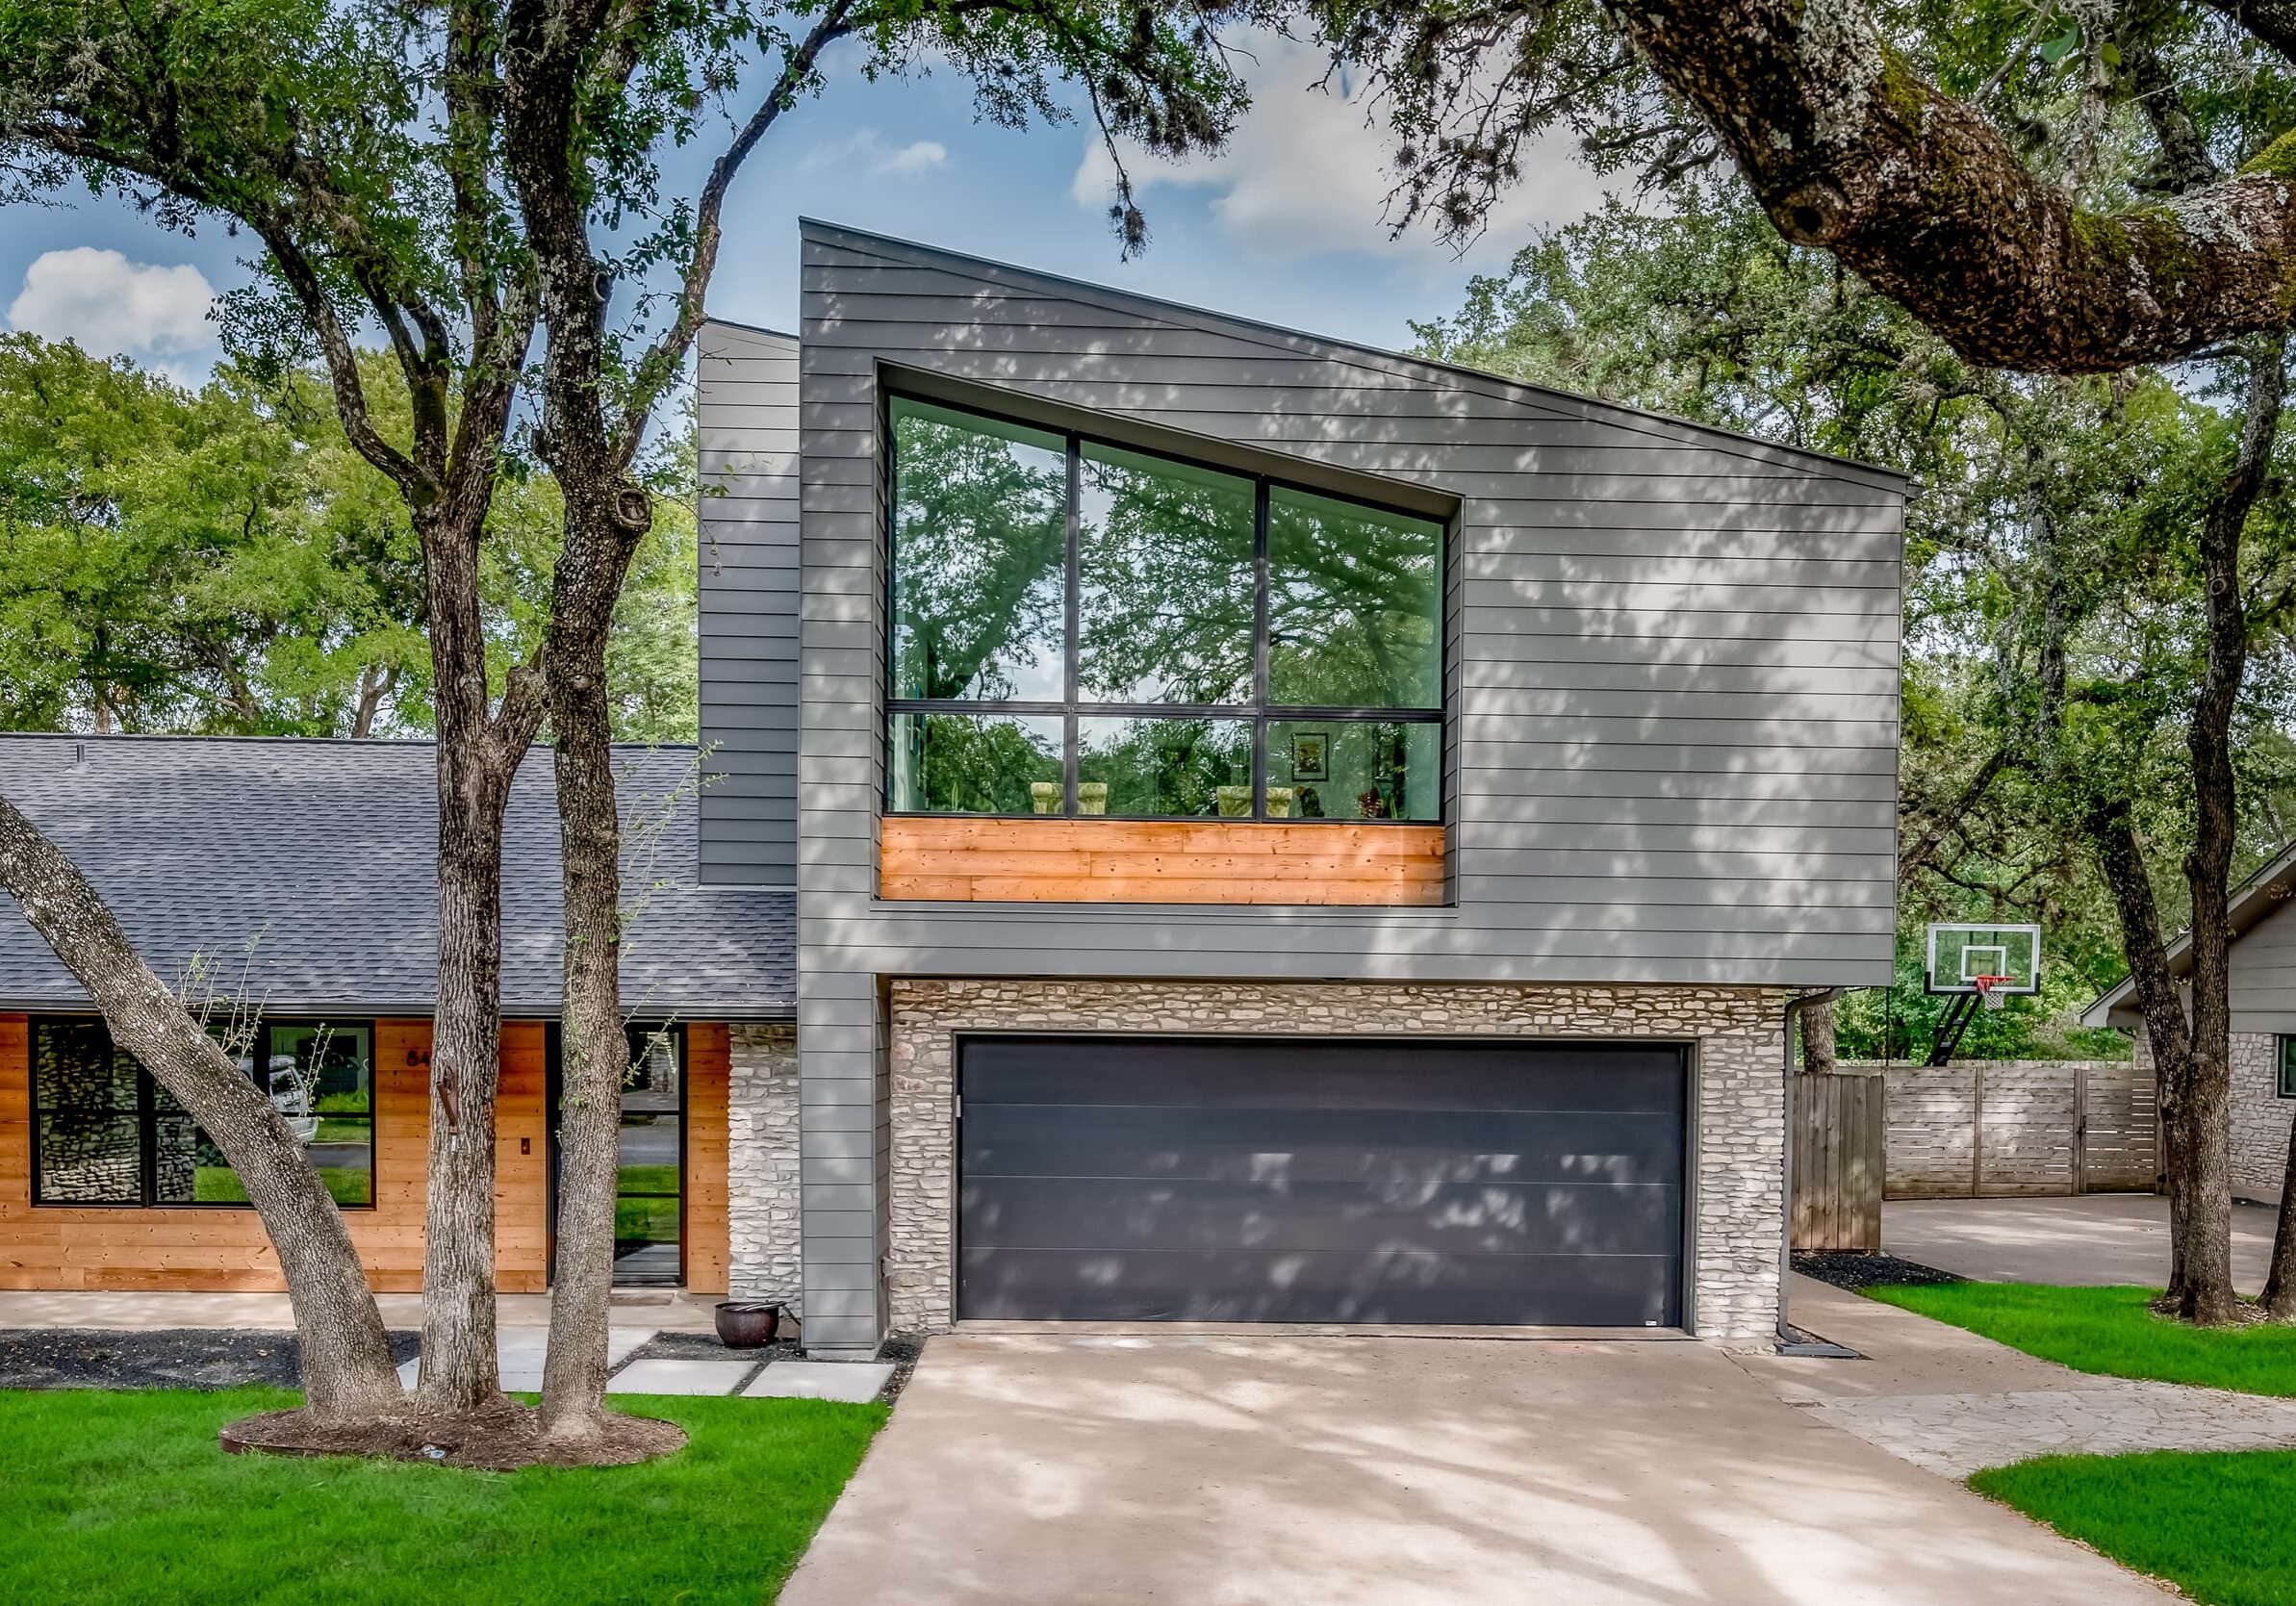 Exterior View of Modern Home by Jay Corder Architect